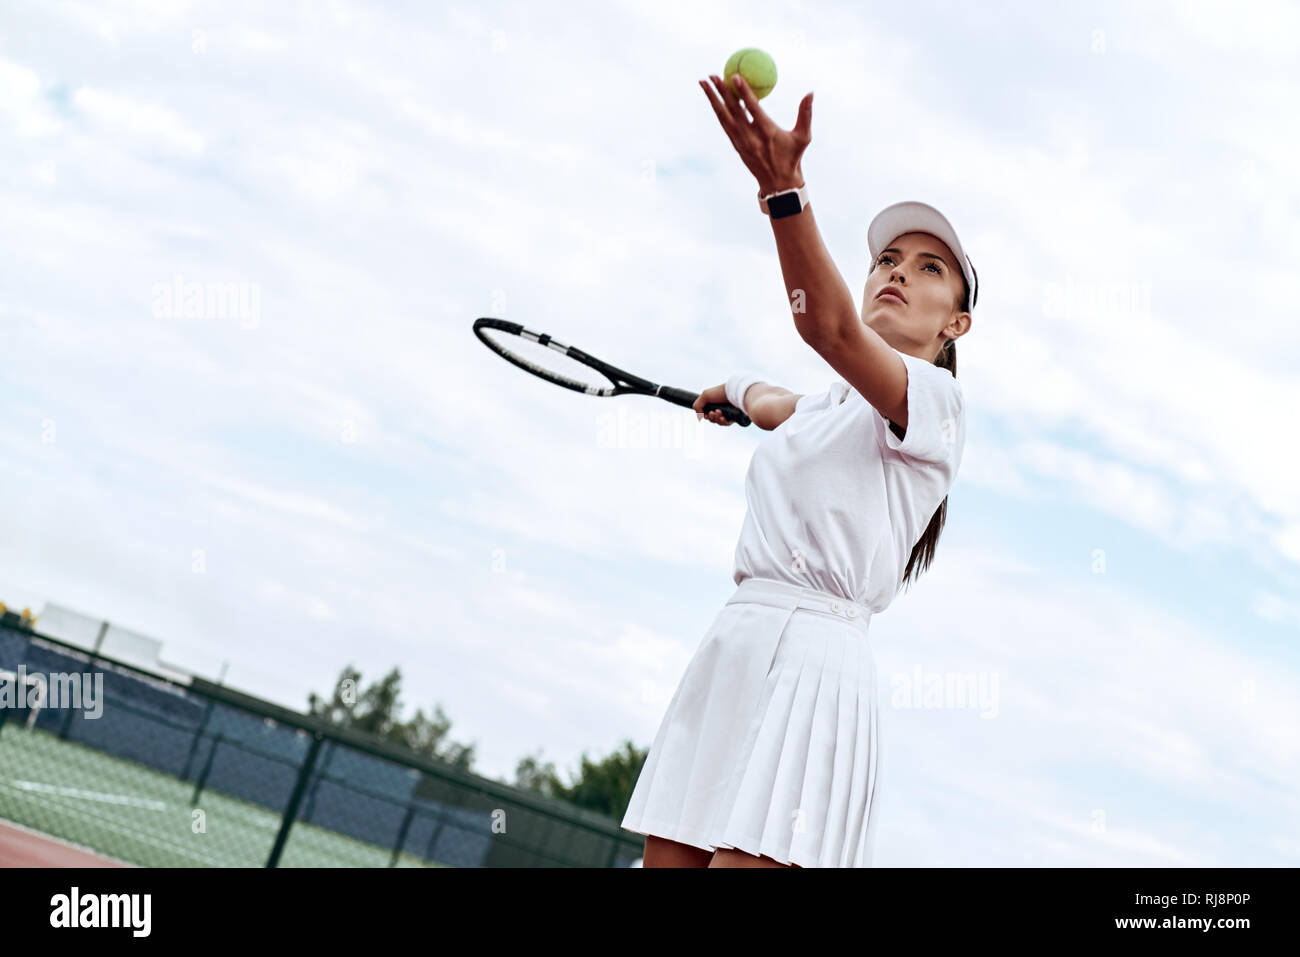 Attractive woman in white sportswear with the racket and the ball in her hands is ready to hit the ball on the court Stock Photo